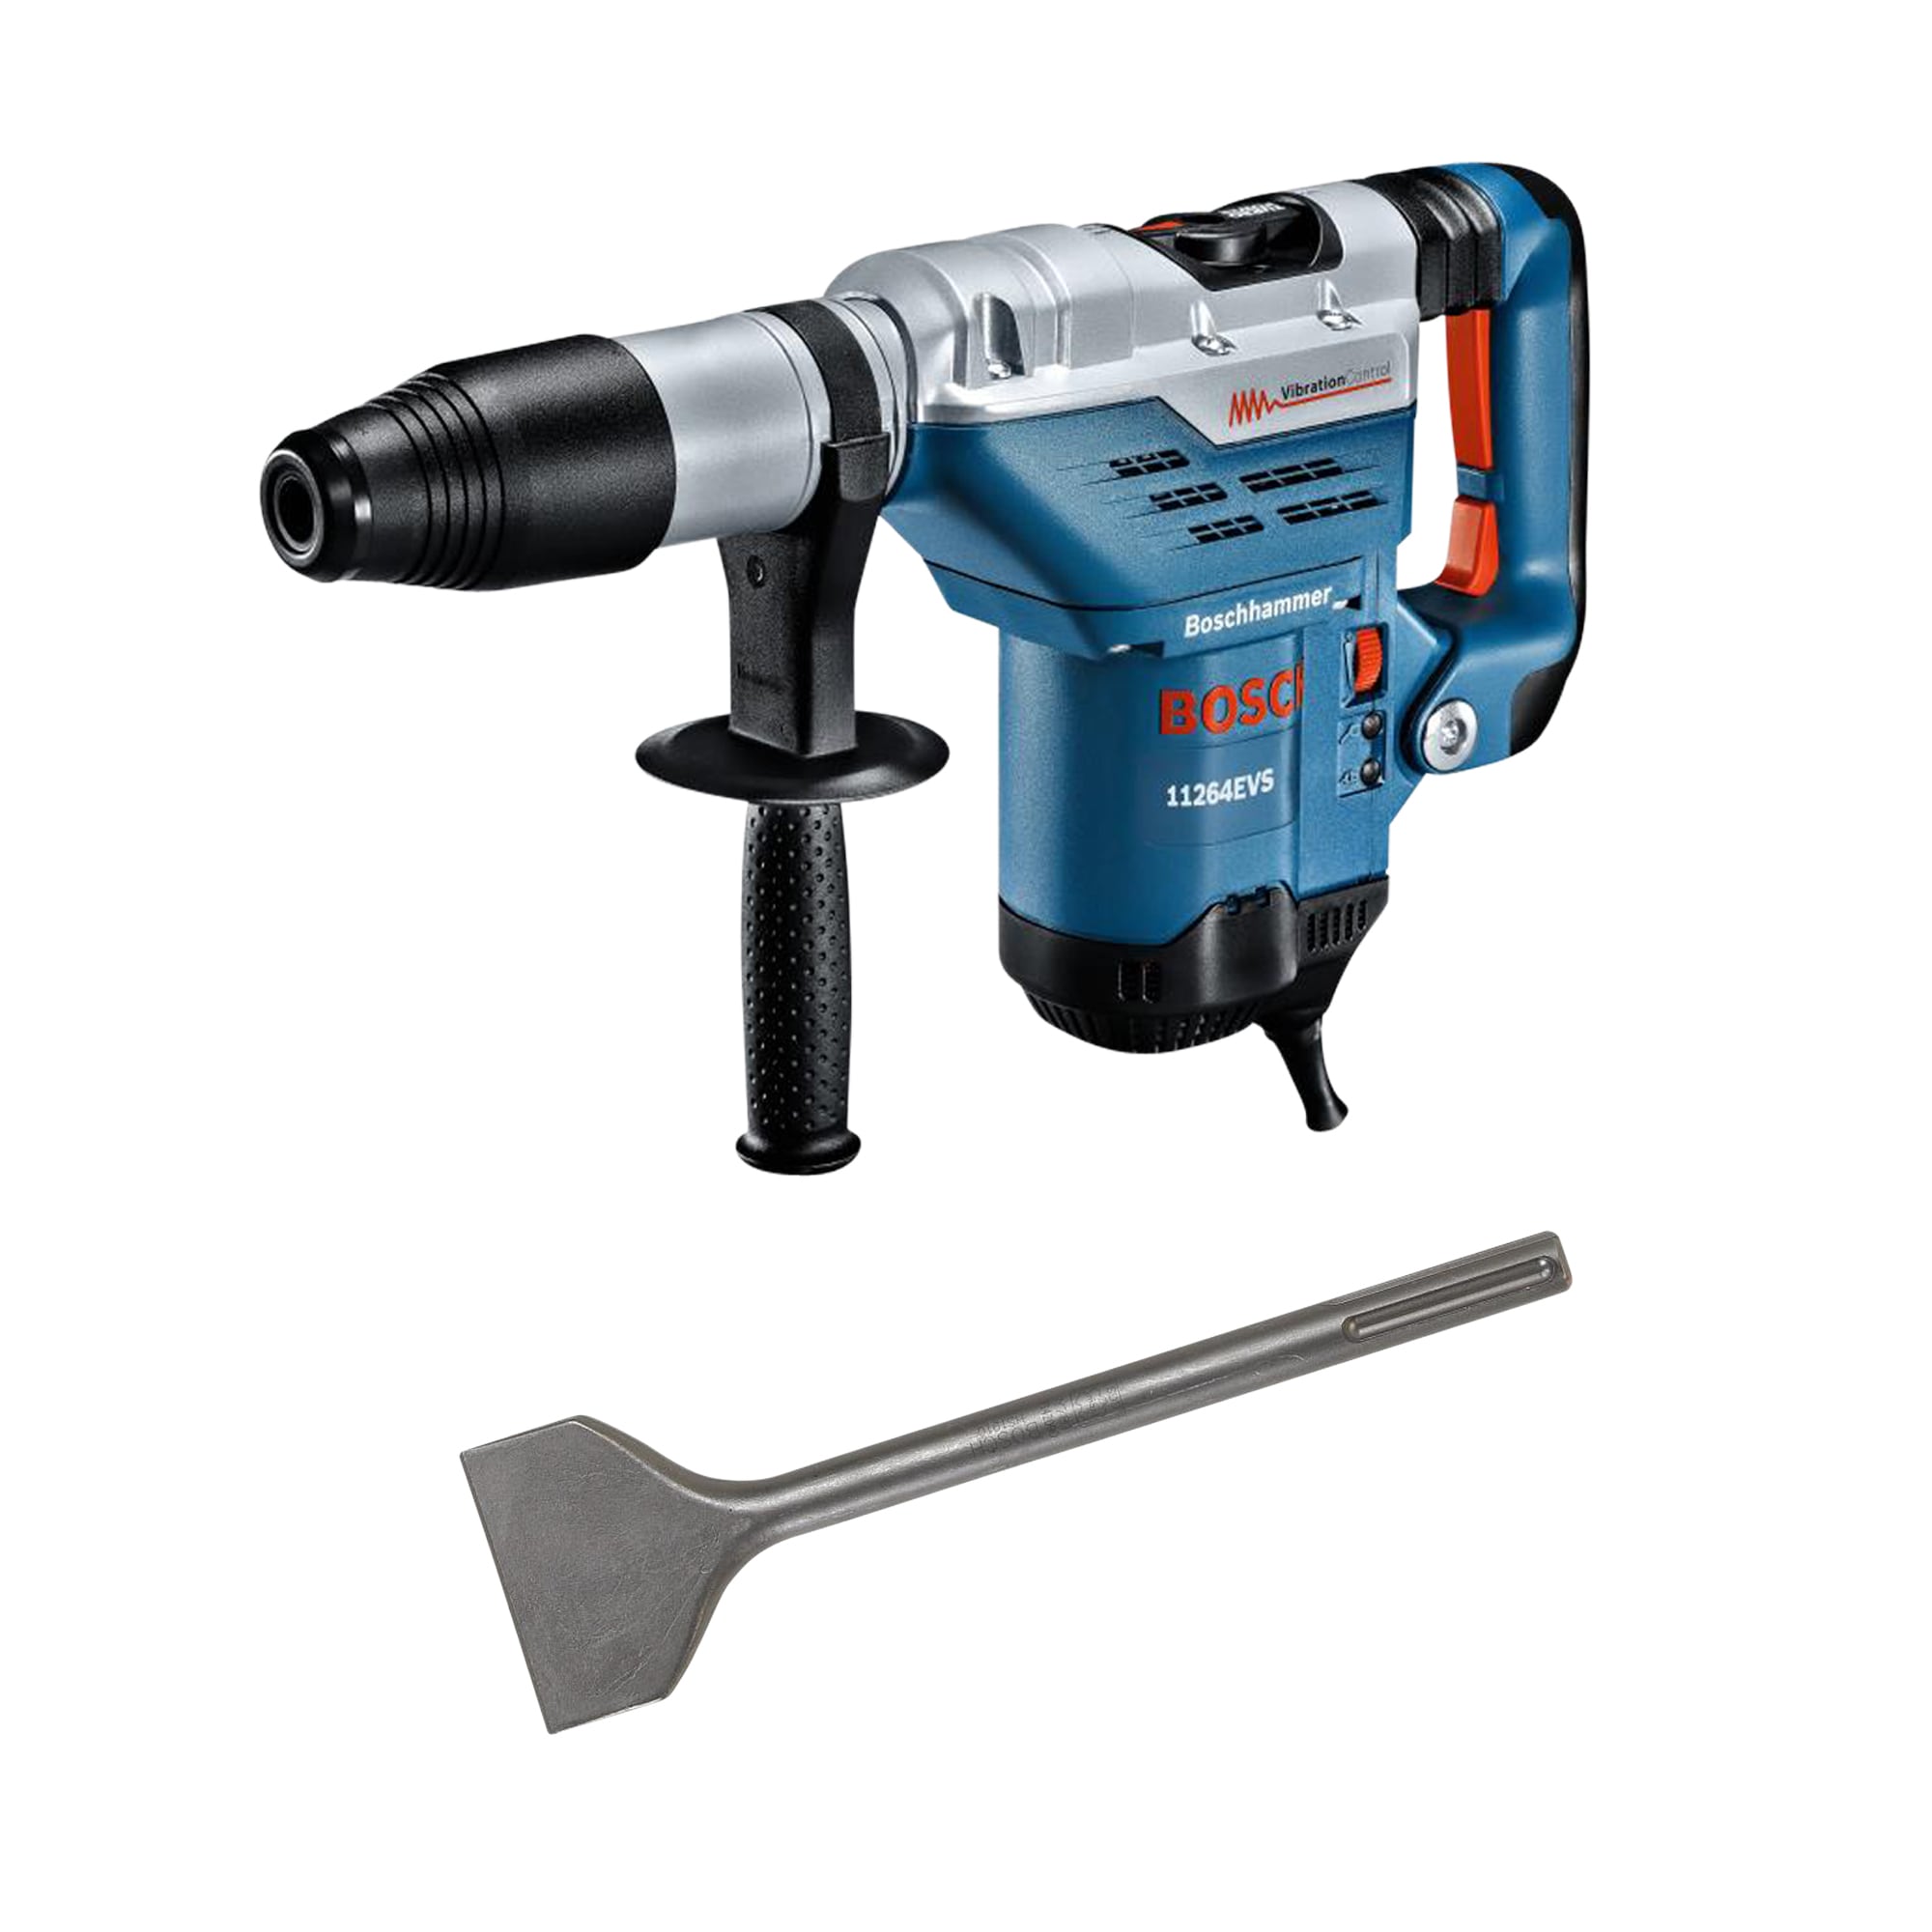 Bosch SDS-Plus 5/8 In. x 8 In. 2-Cutter Rotary Hammer Drill Bit - Holbrook,  NY - GTS Builders Supply